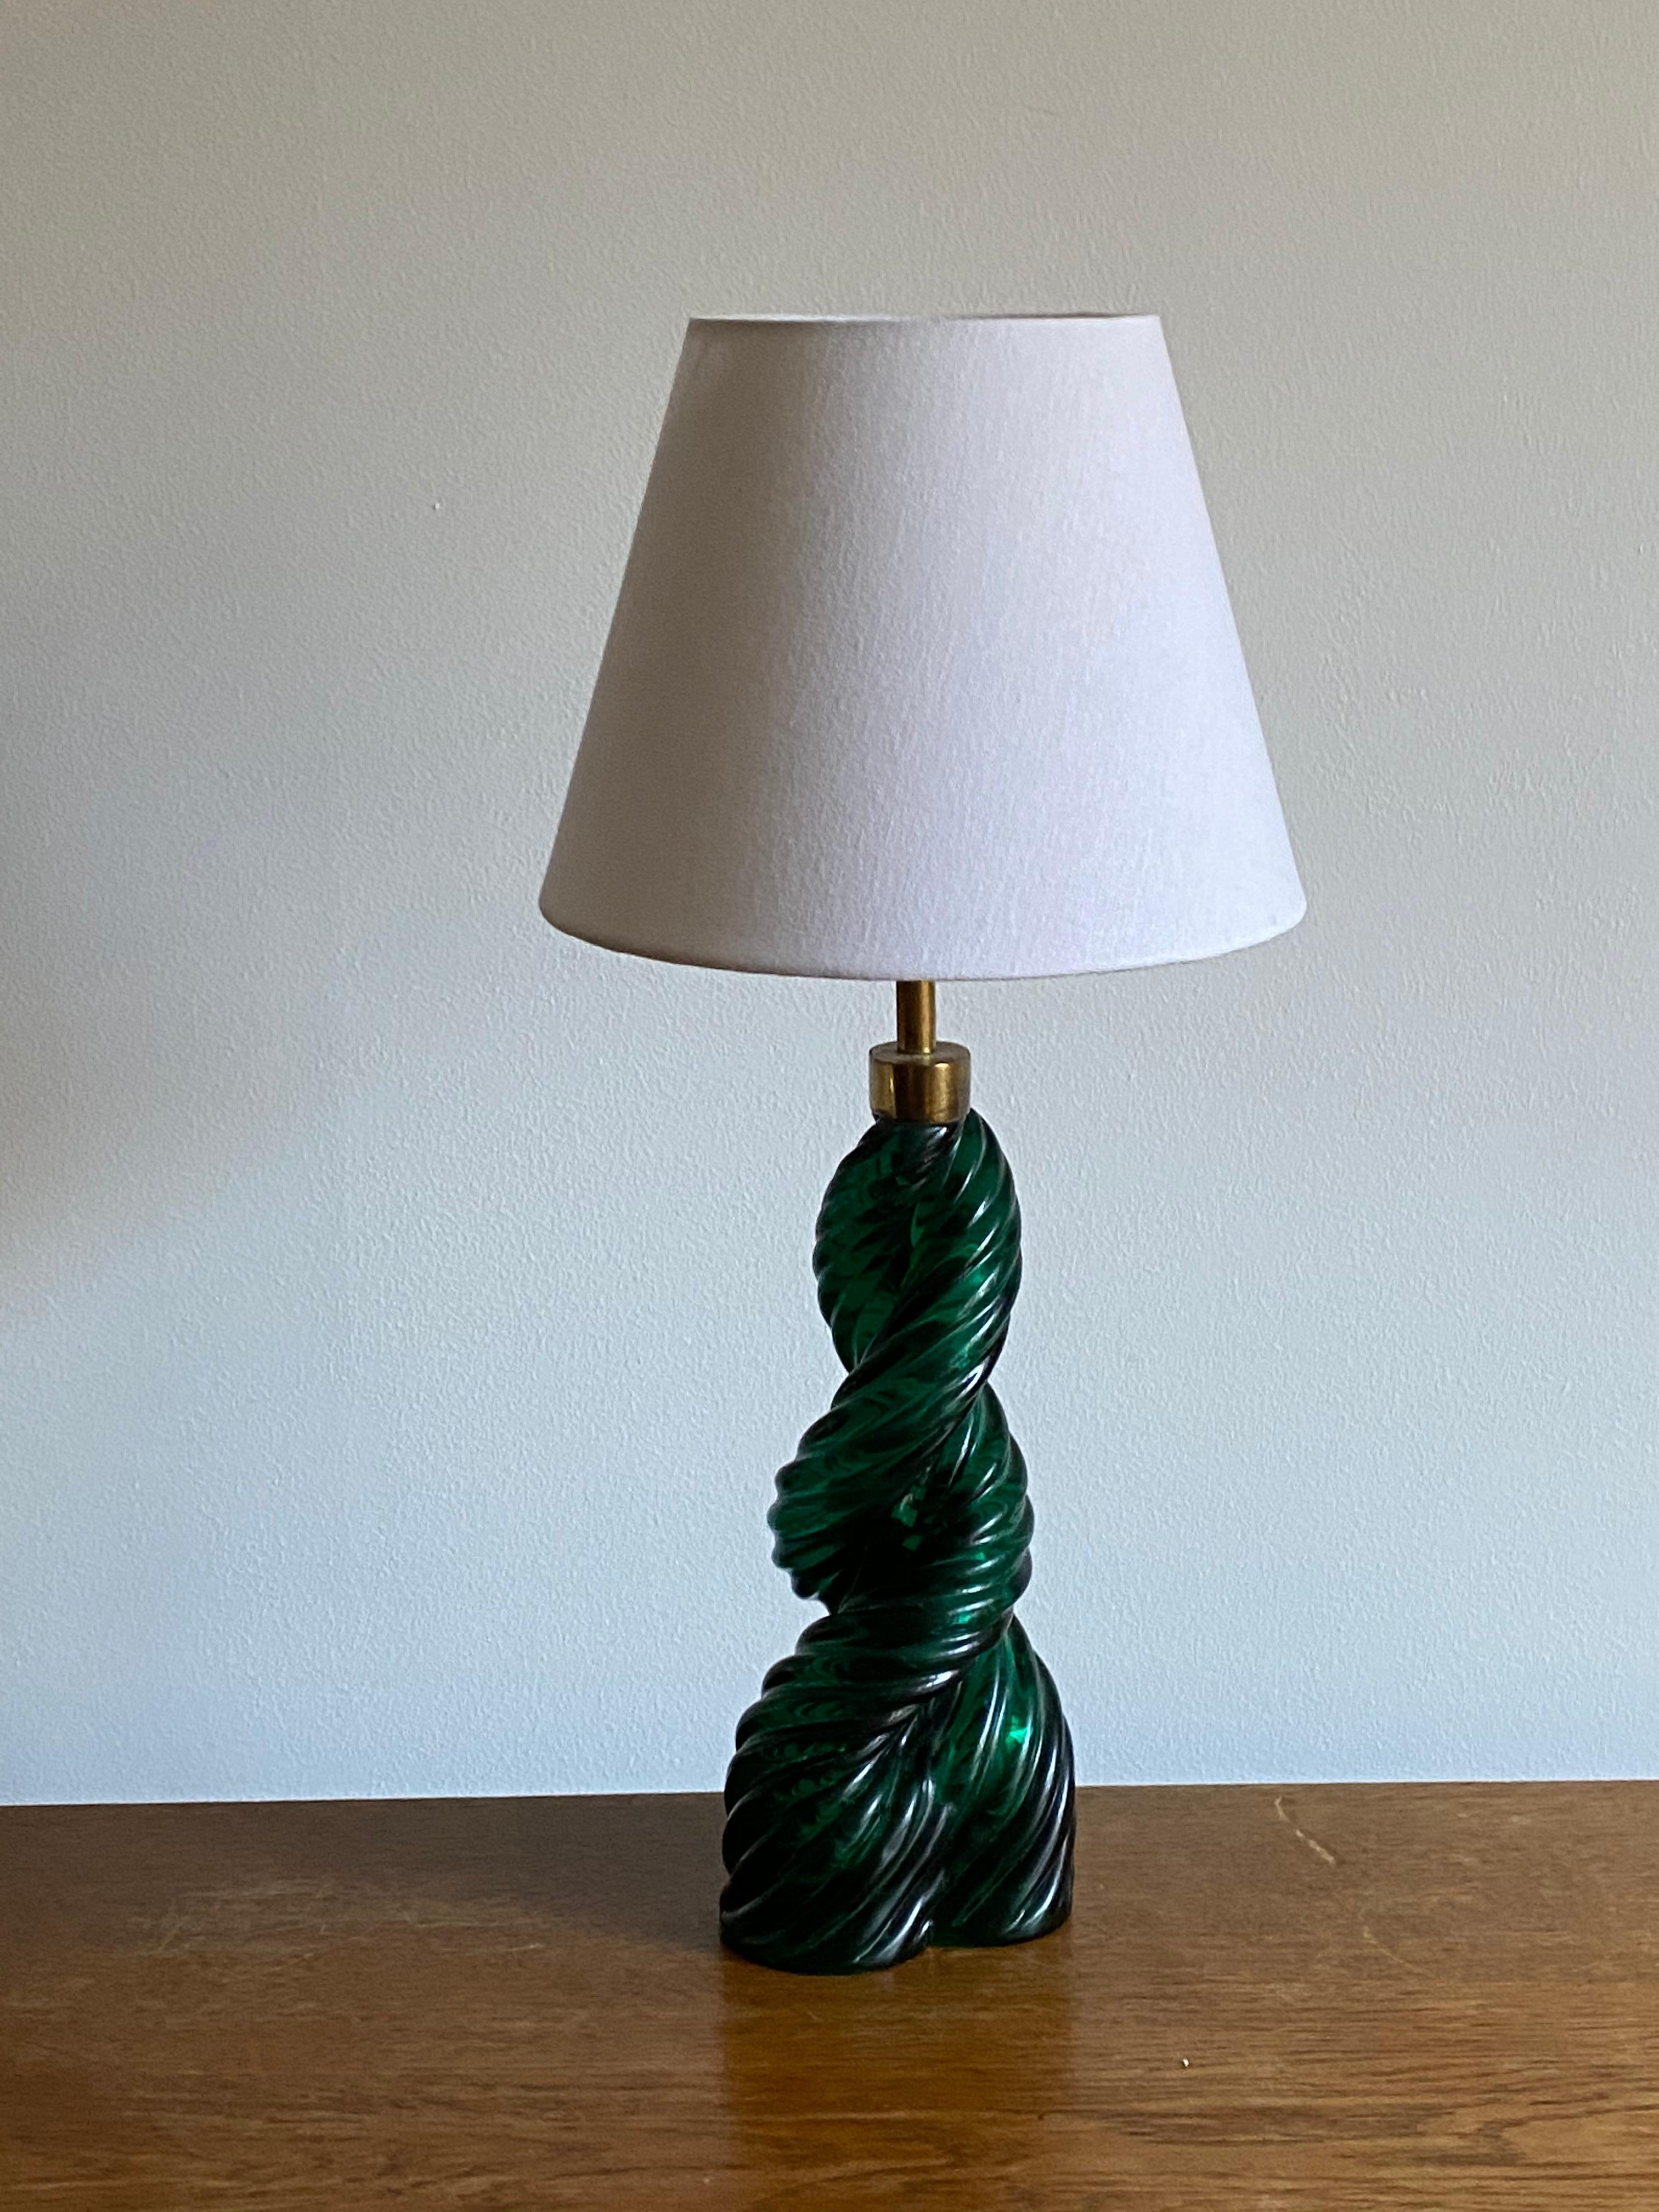 An organic table lamp. Designed Paolo Venini & Carlo Scarpa. In green colored glass and brass. Italy, 1930s

Lampshade is not included in the purchase, stated dimensions are without the lampshade. 

Other lighting designers of the period include